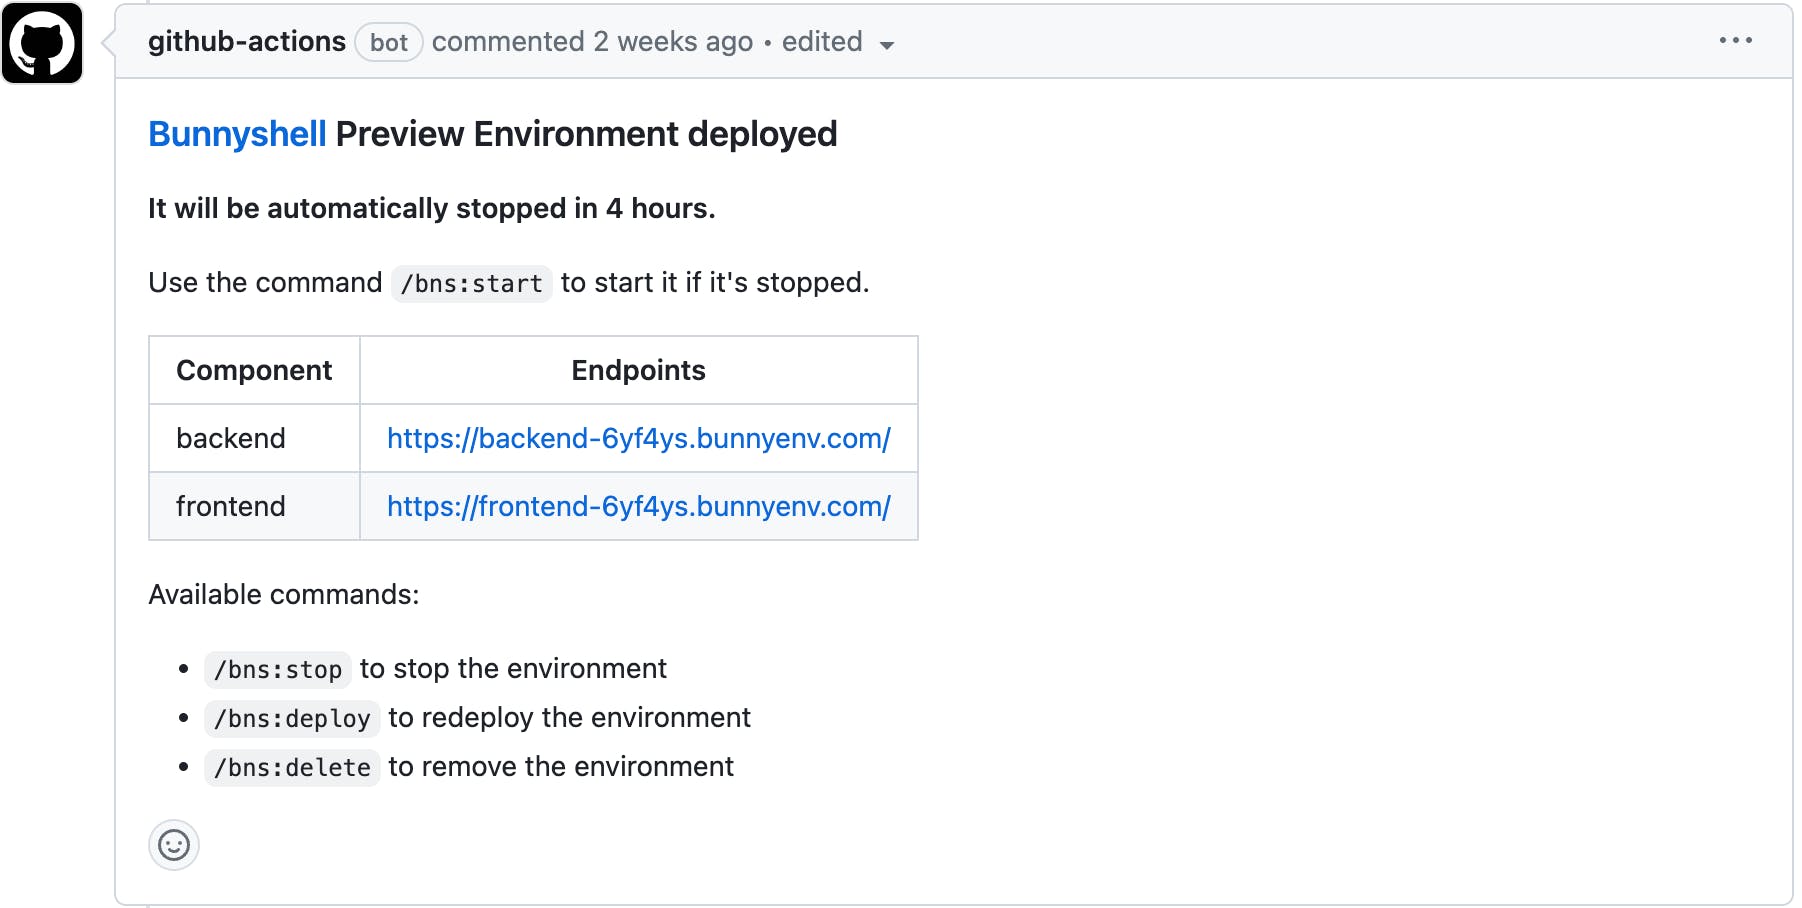 Github Actions commented with the live preview environment details.